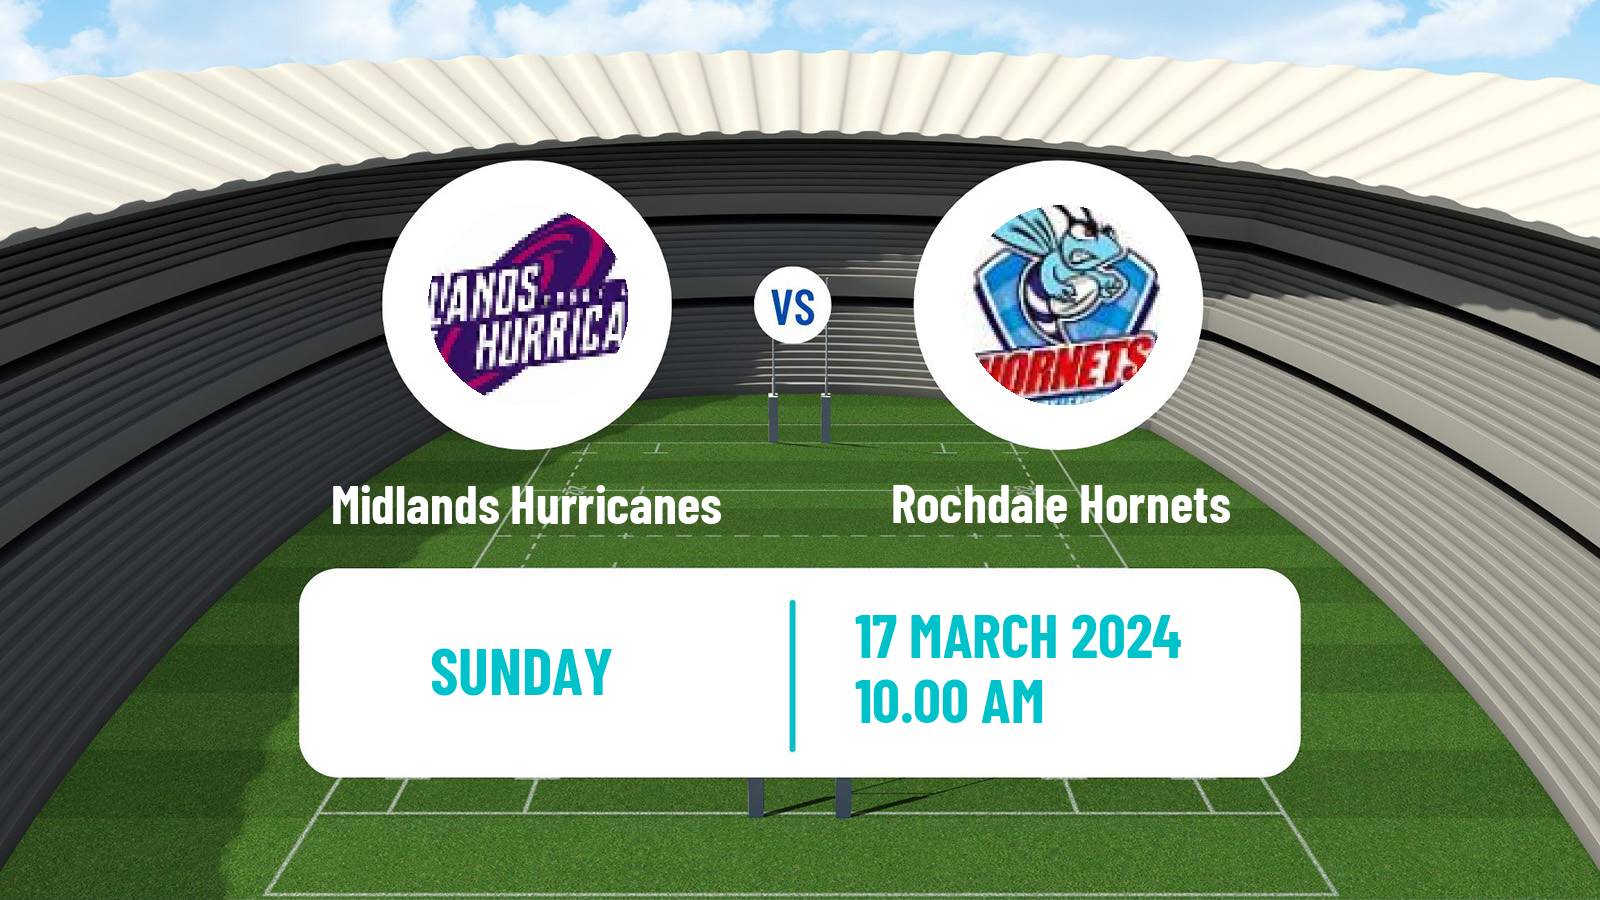 Rugby league English League 1 Rugby League Midlands Hurricanes - Rochdale Hornets